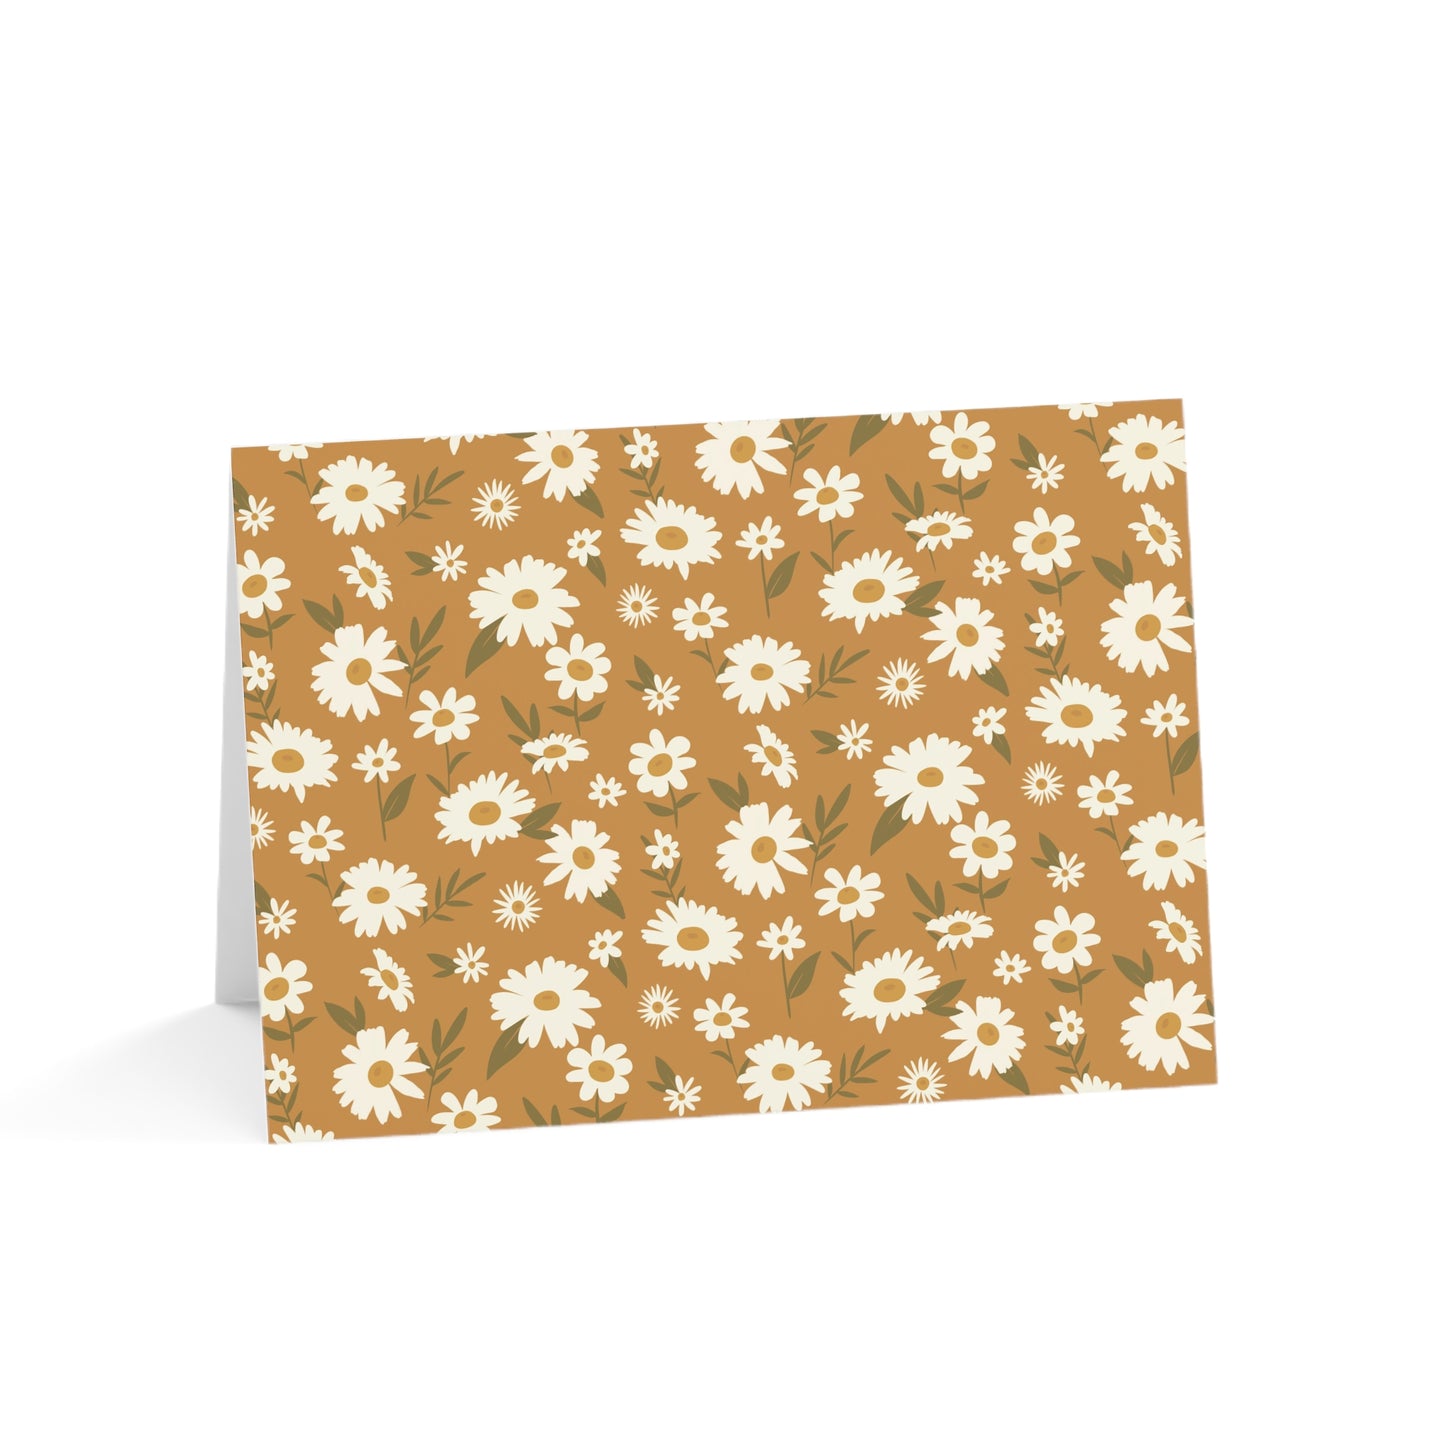 Golden Daisies Greeting Cards (1, 10, 30, and 50pcs)